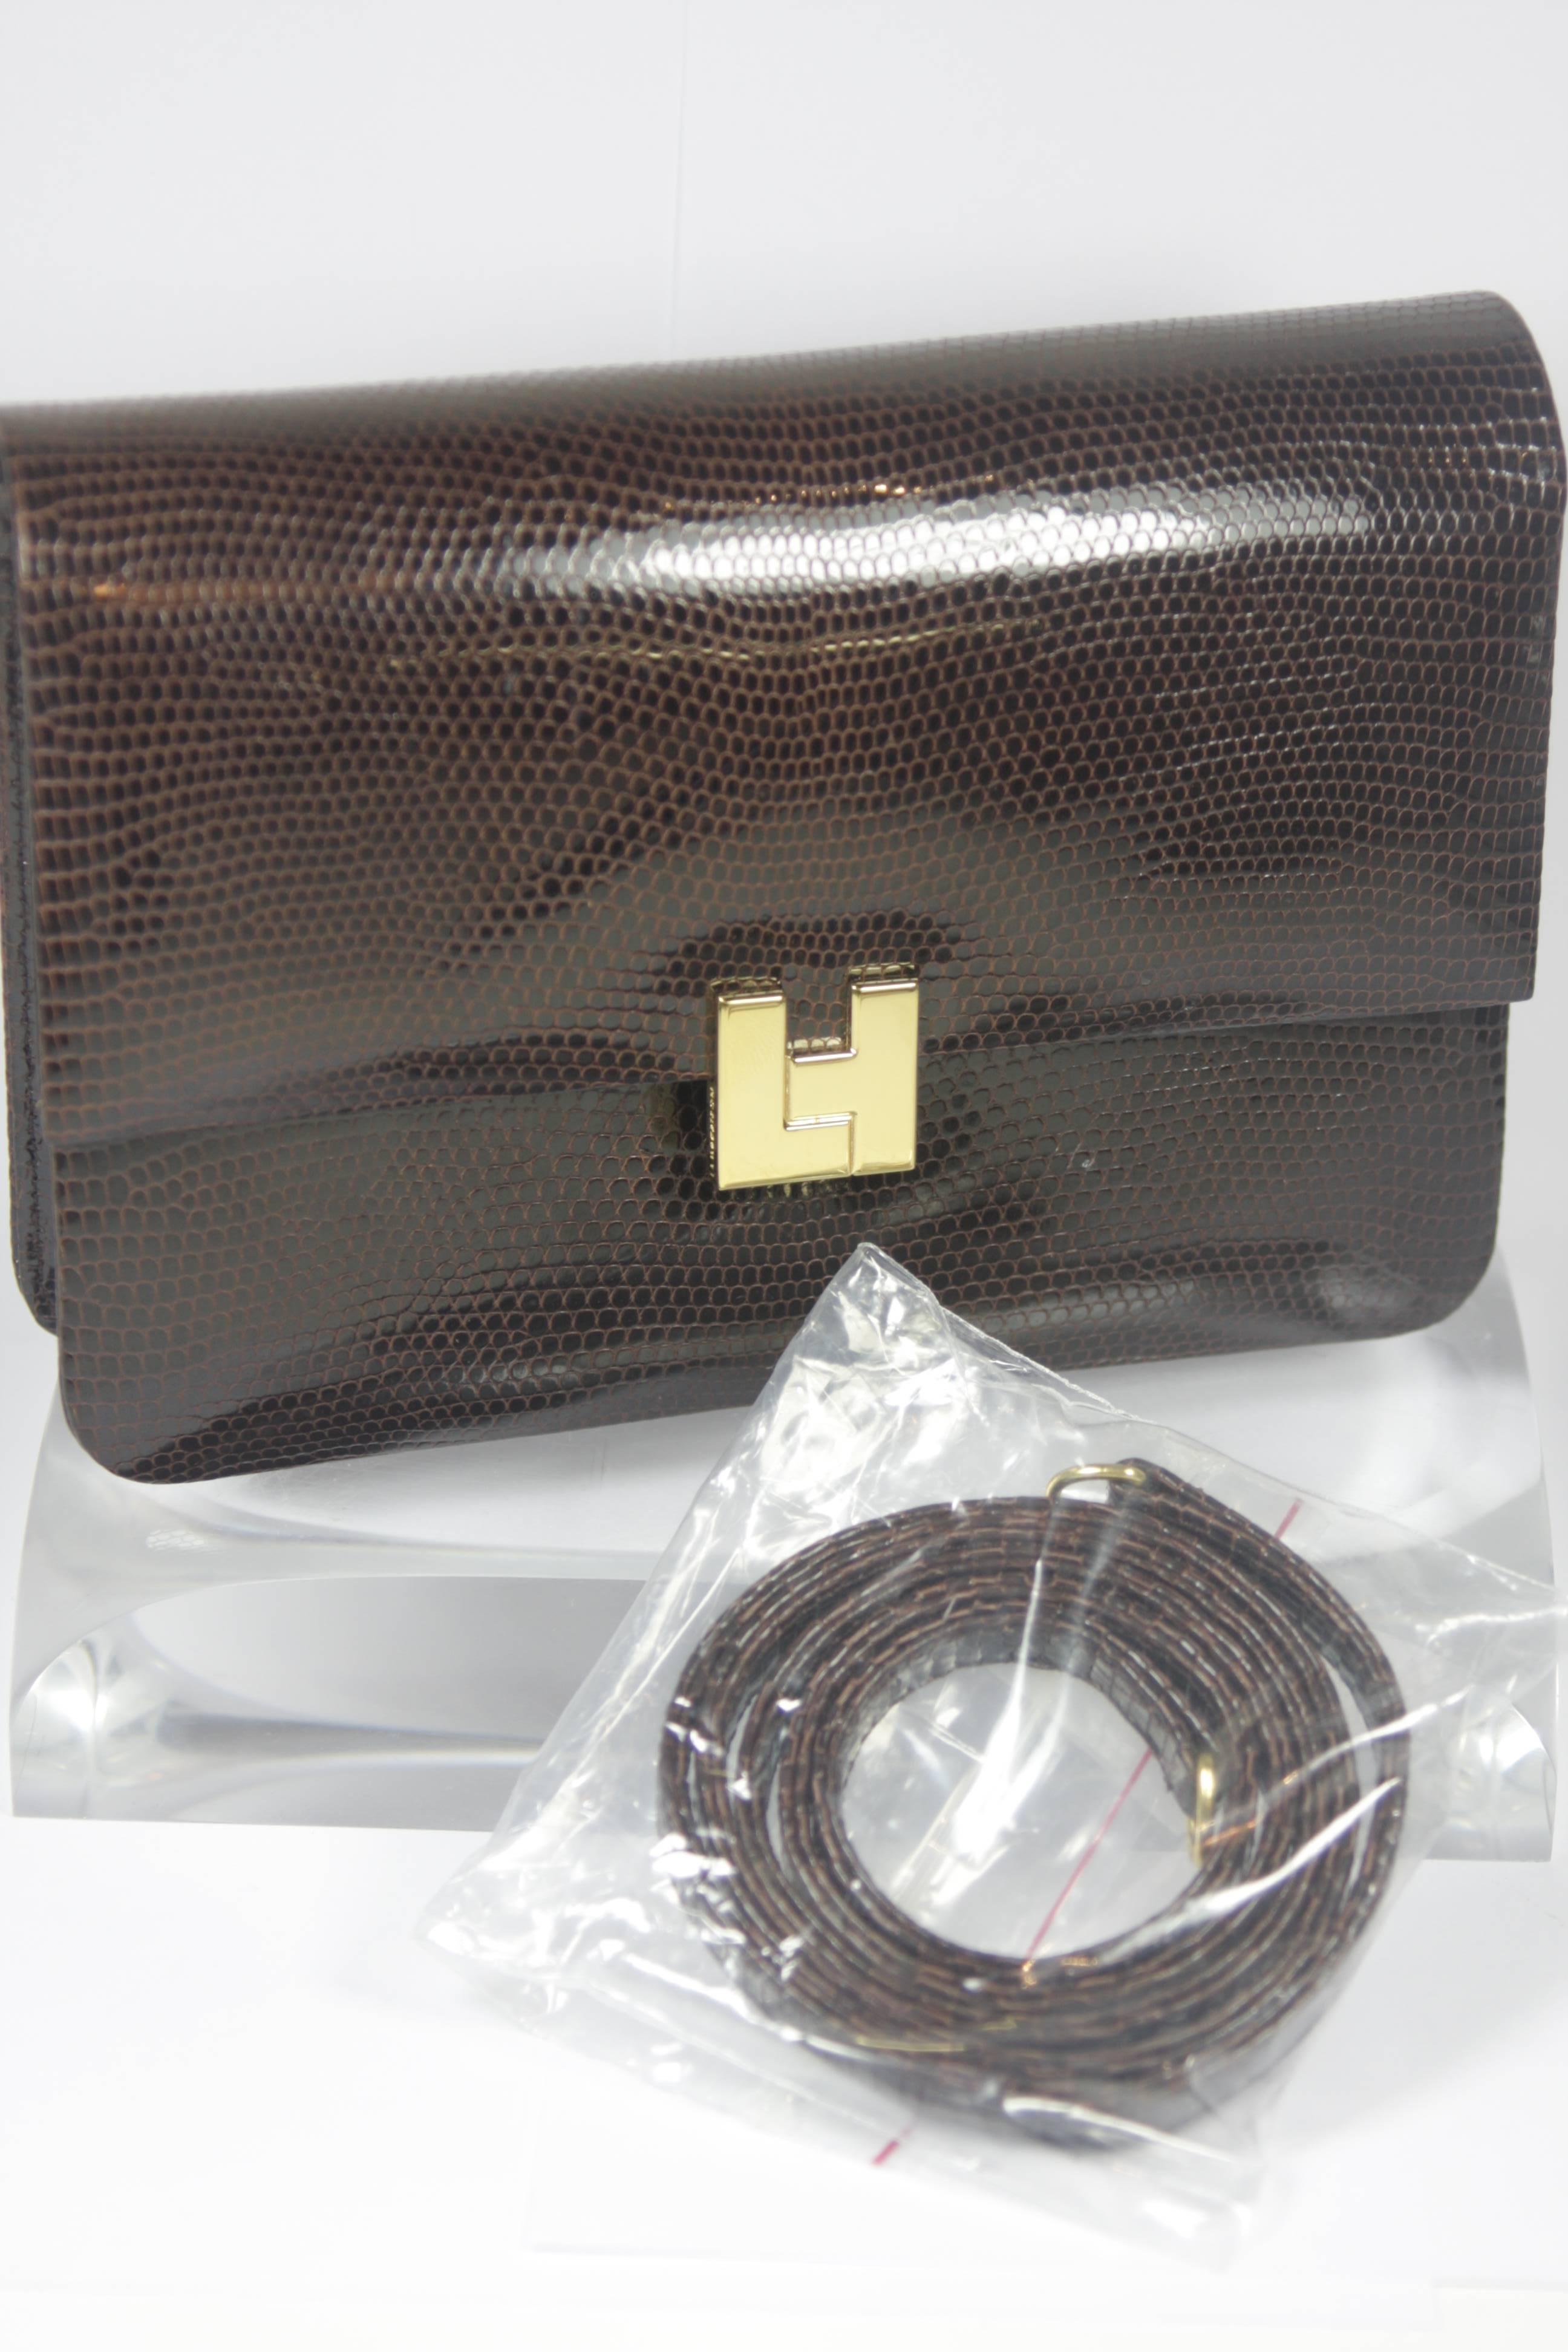 LAMBERTSON TRUEX Brown Lizard Clutch with Gold Hardware and Optional Strap 4